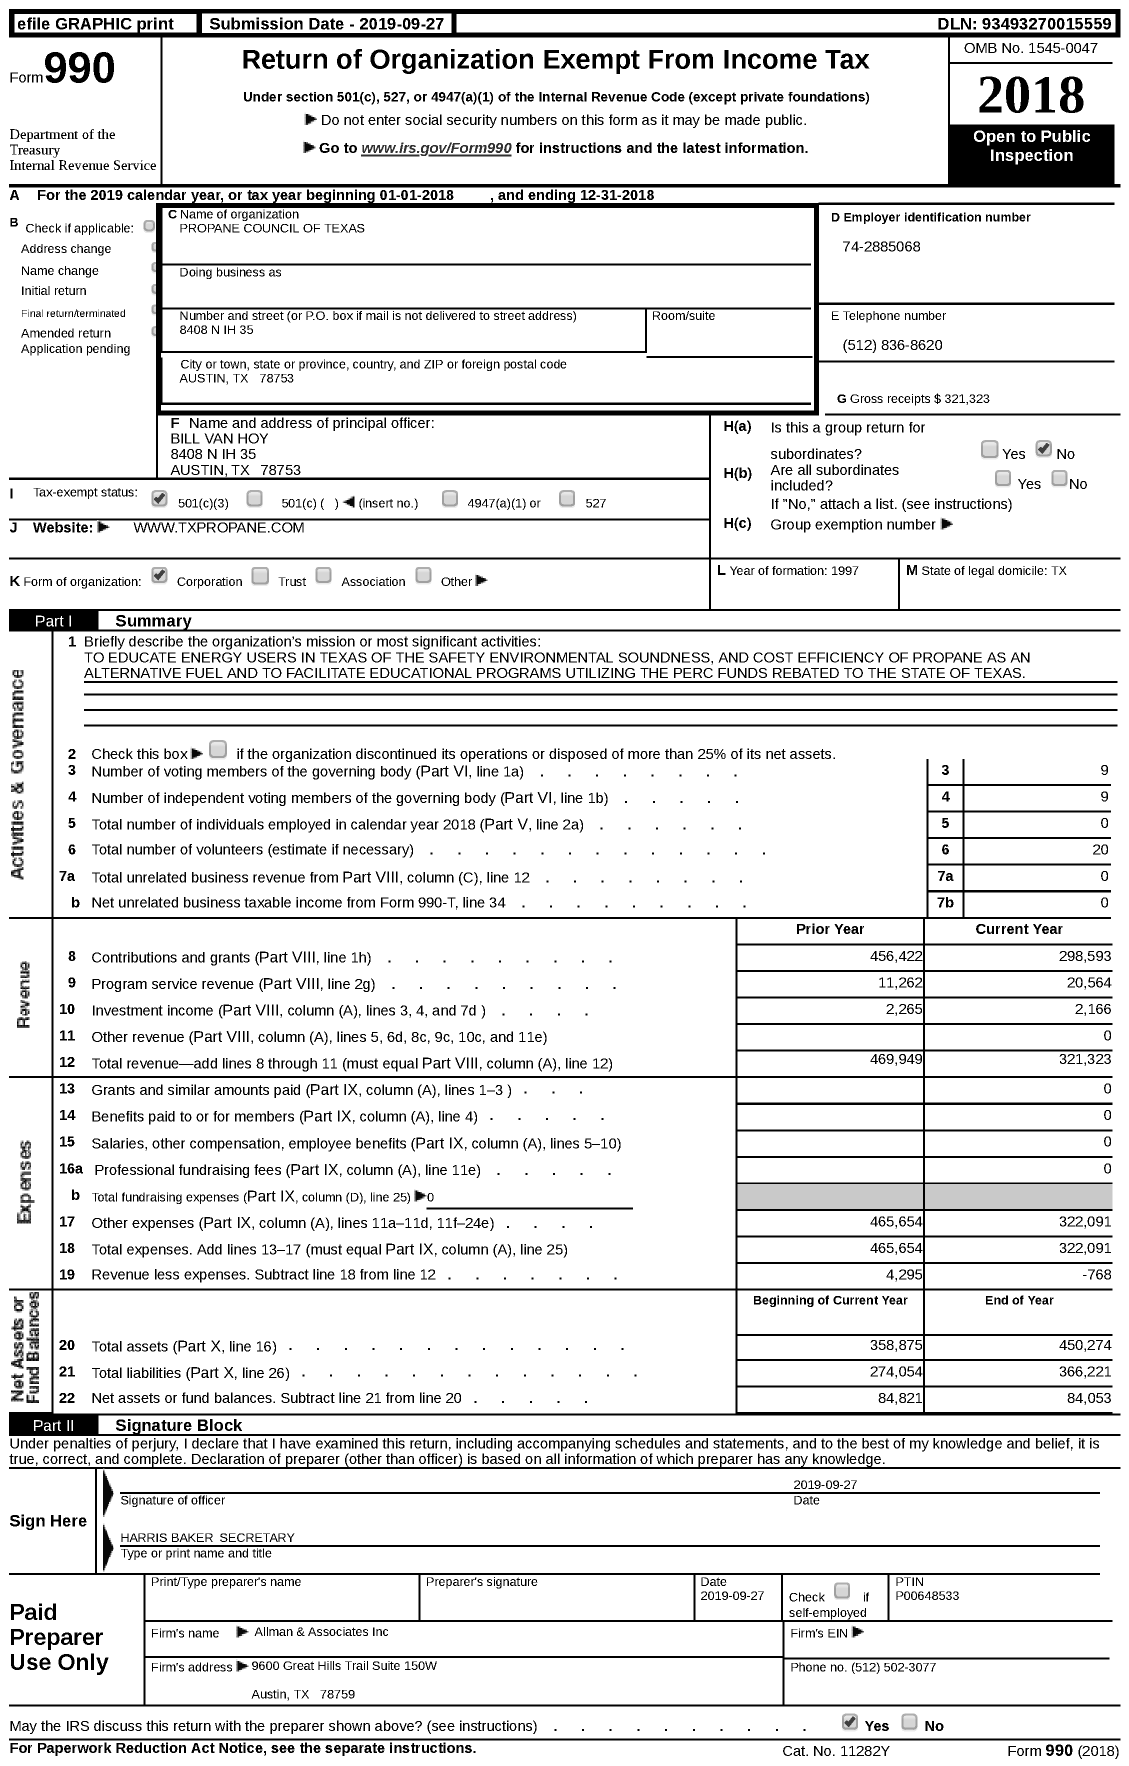 Image of first page of 2018 Form 990 for Propane Council of Texas